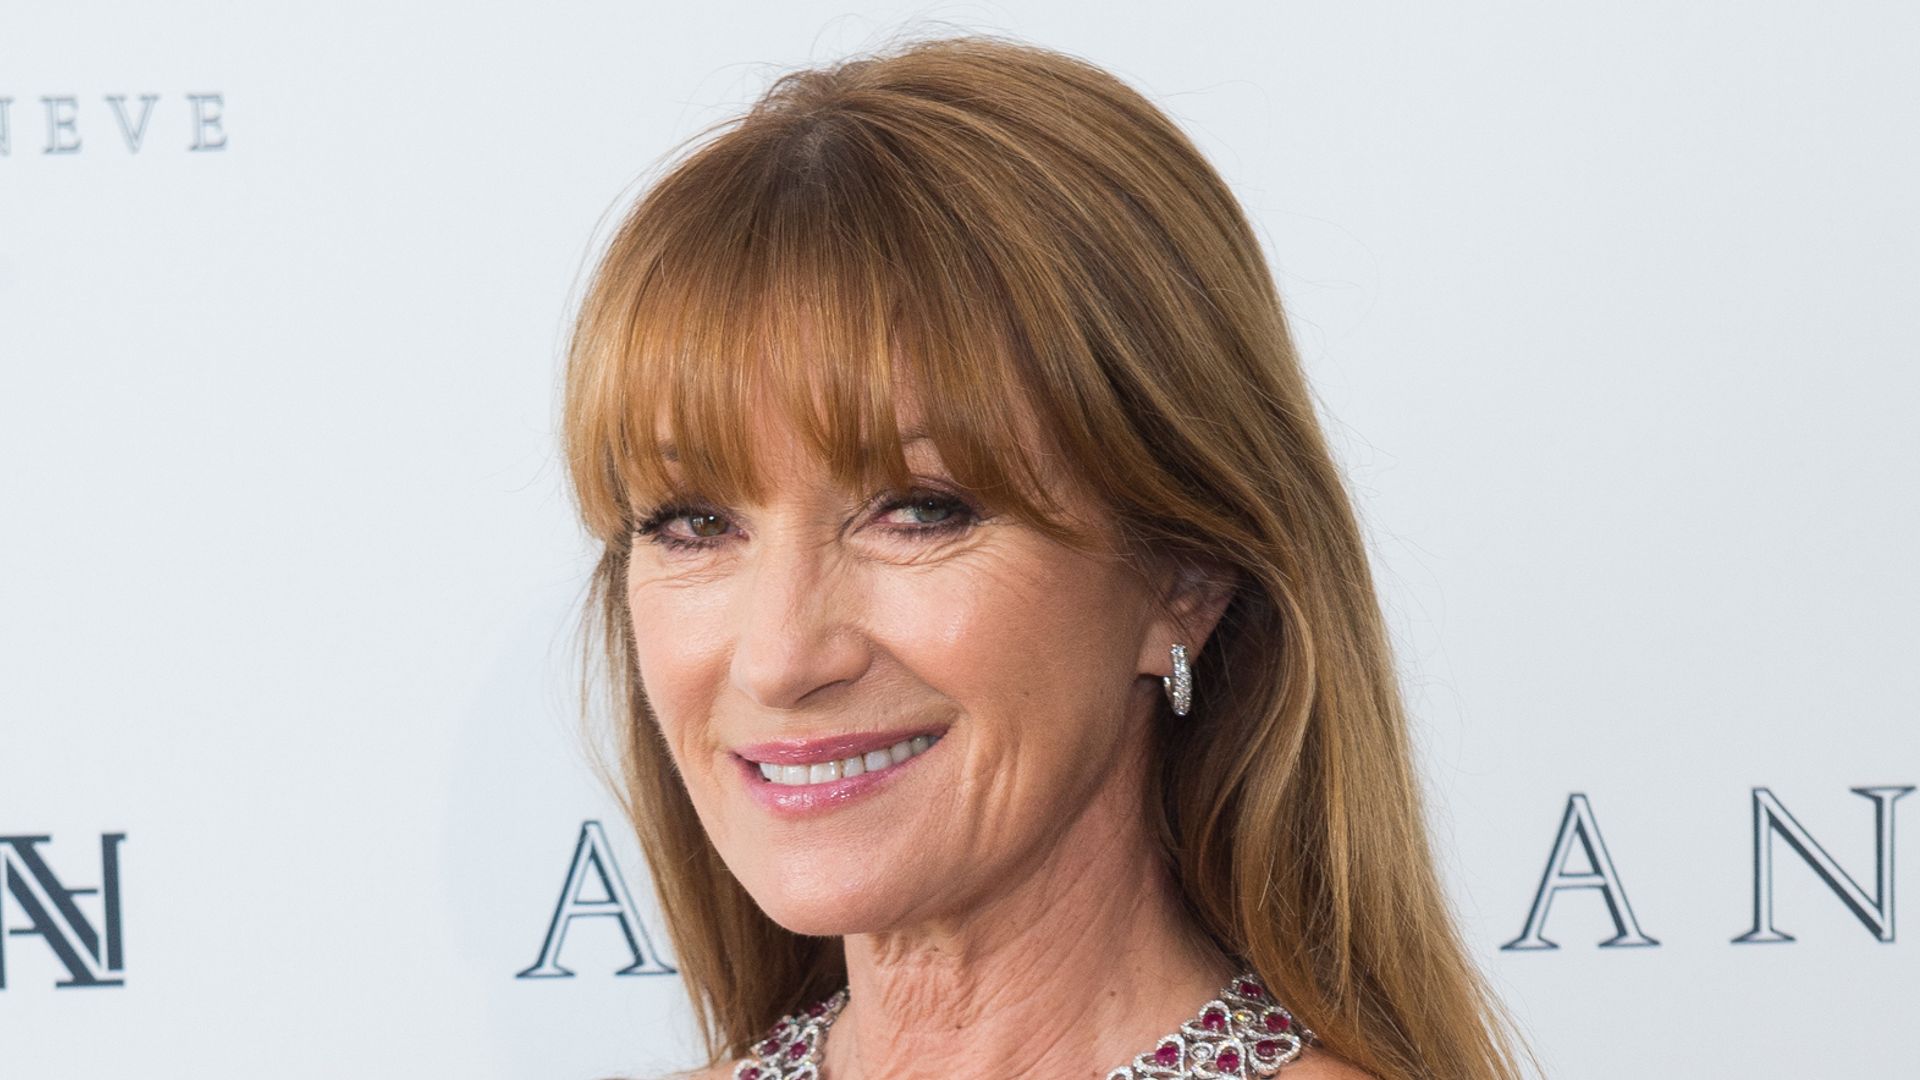 Jane Seymour at the 68th Annual Cannes Film Festival